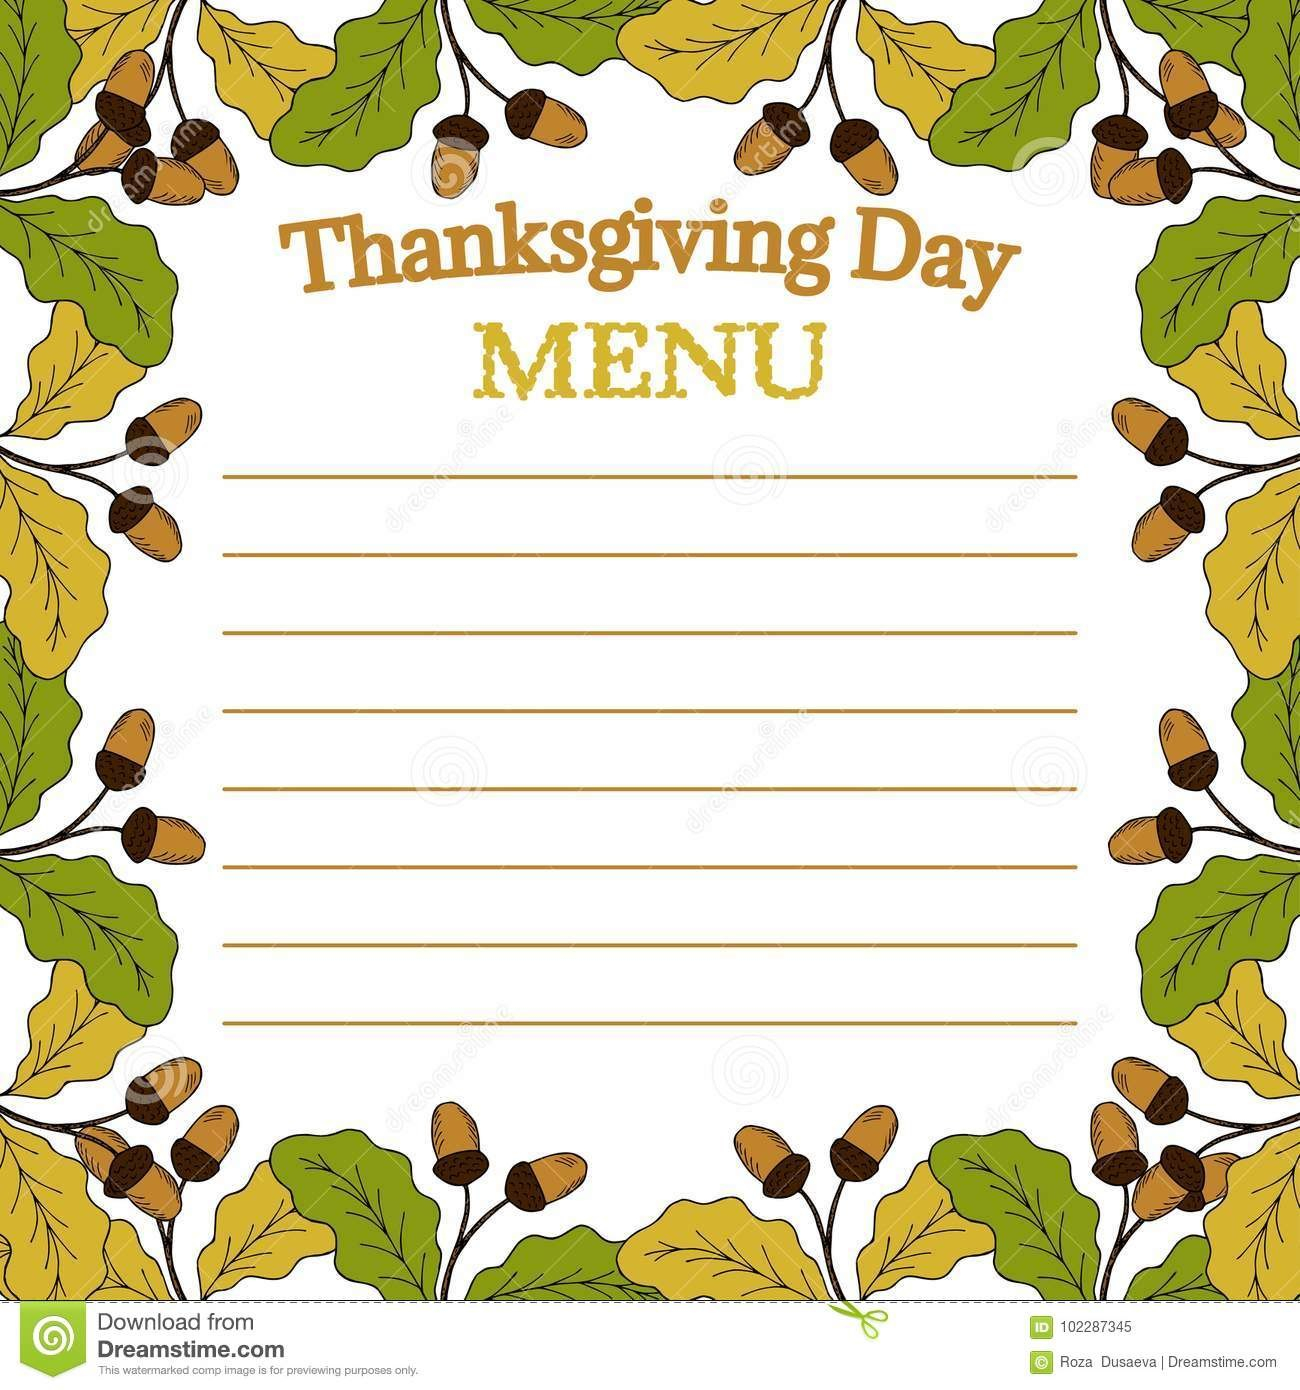 Thanksgiving Day Menu Sketch Stock Vector Illustration Of Icon with ...